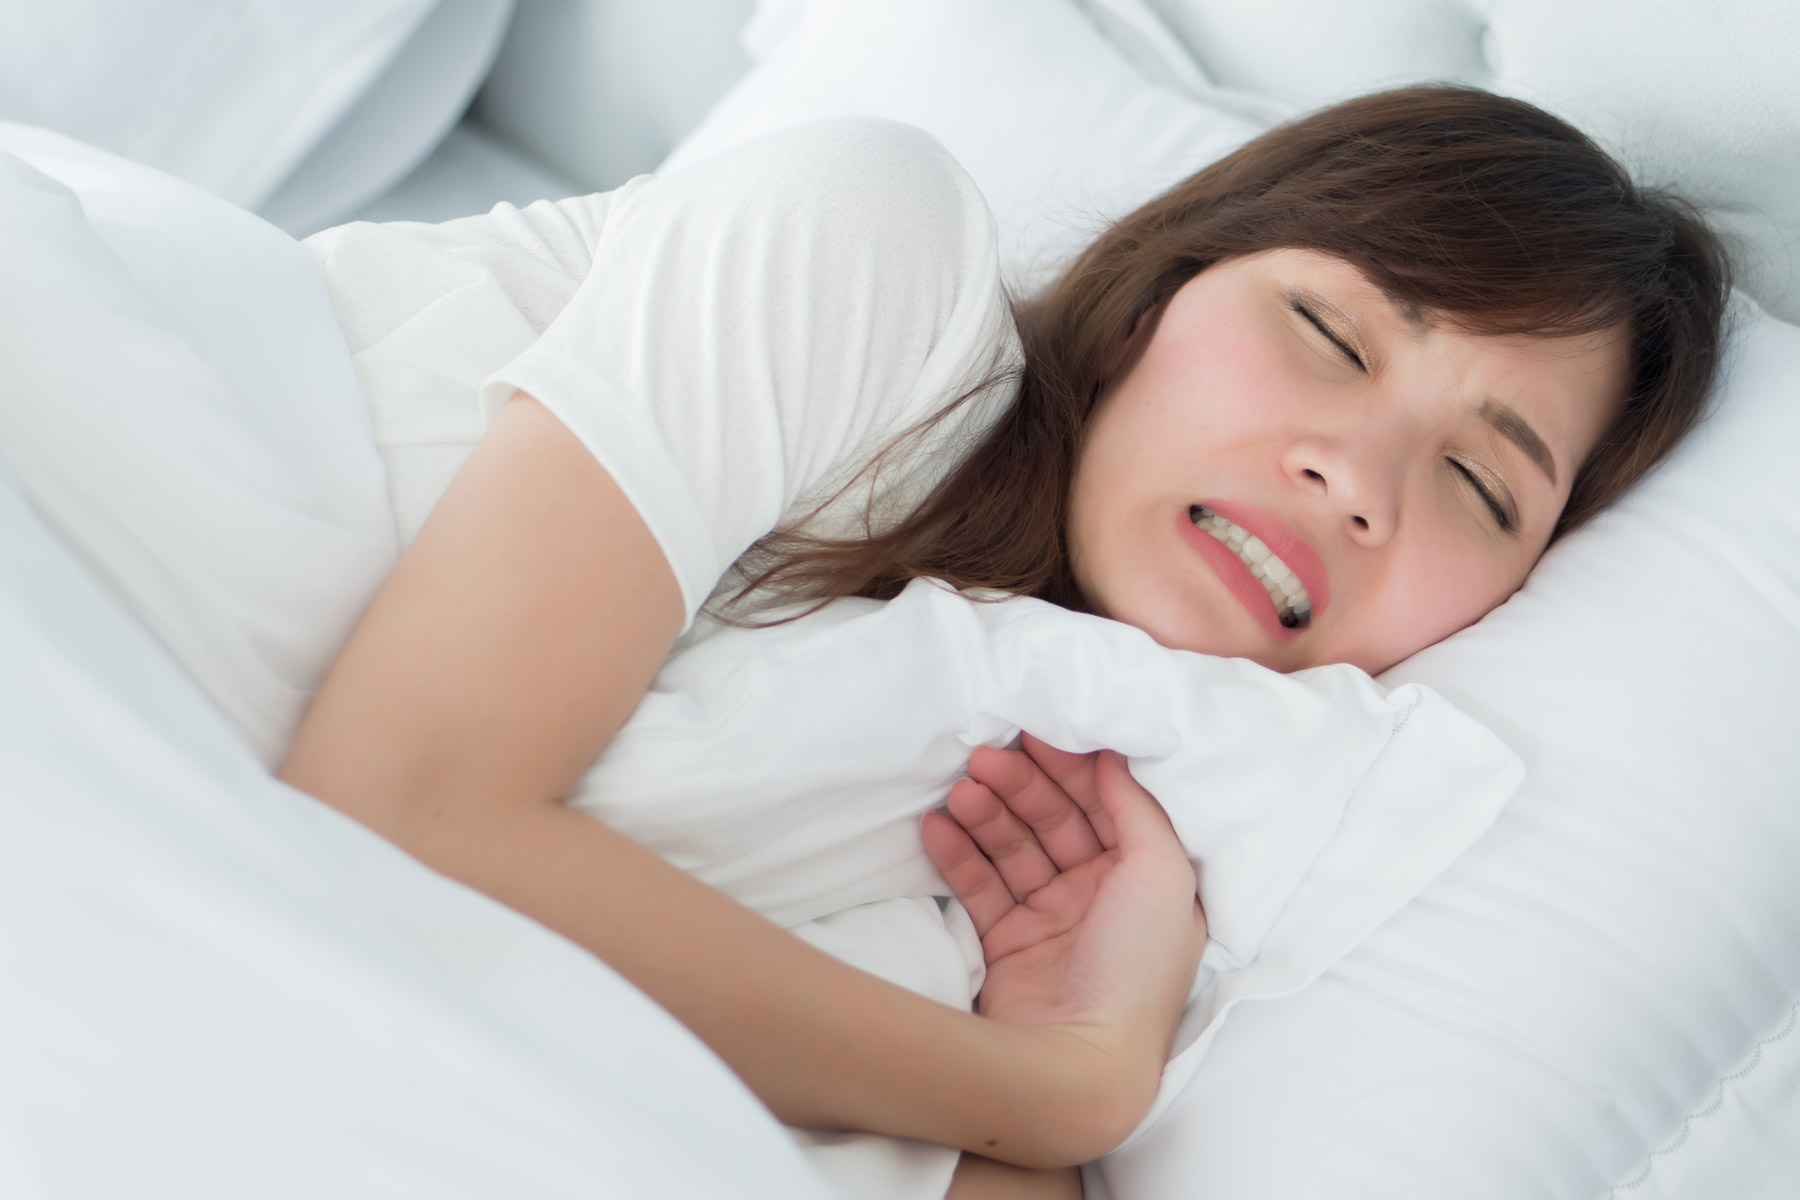 a woman suffering from bruxism in her sleep